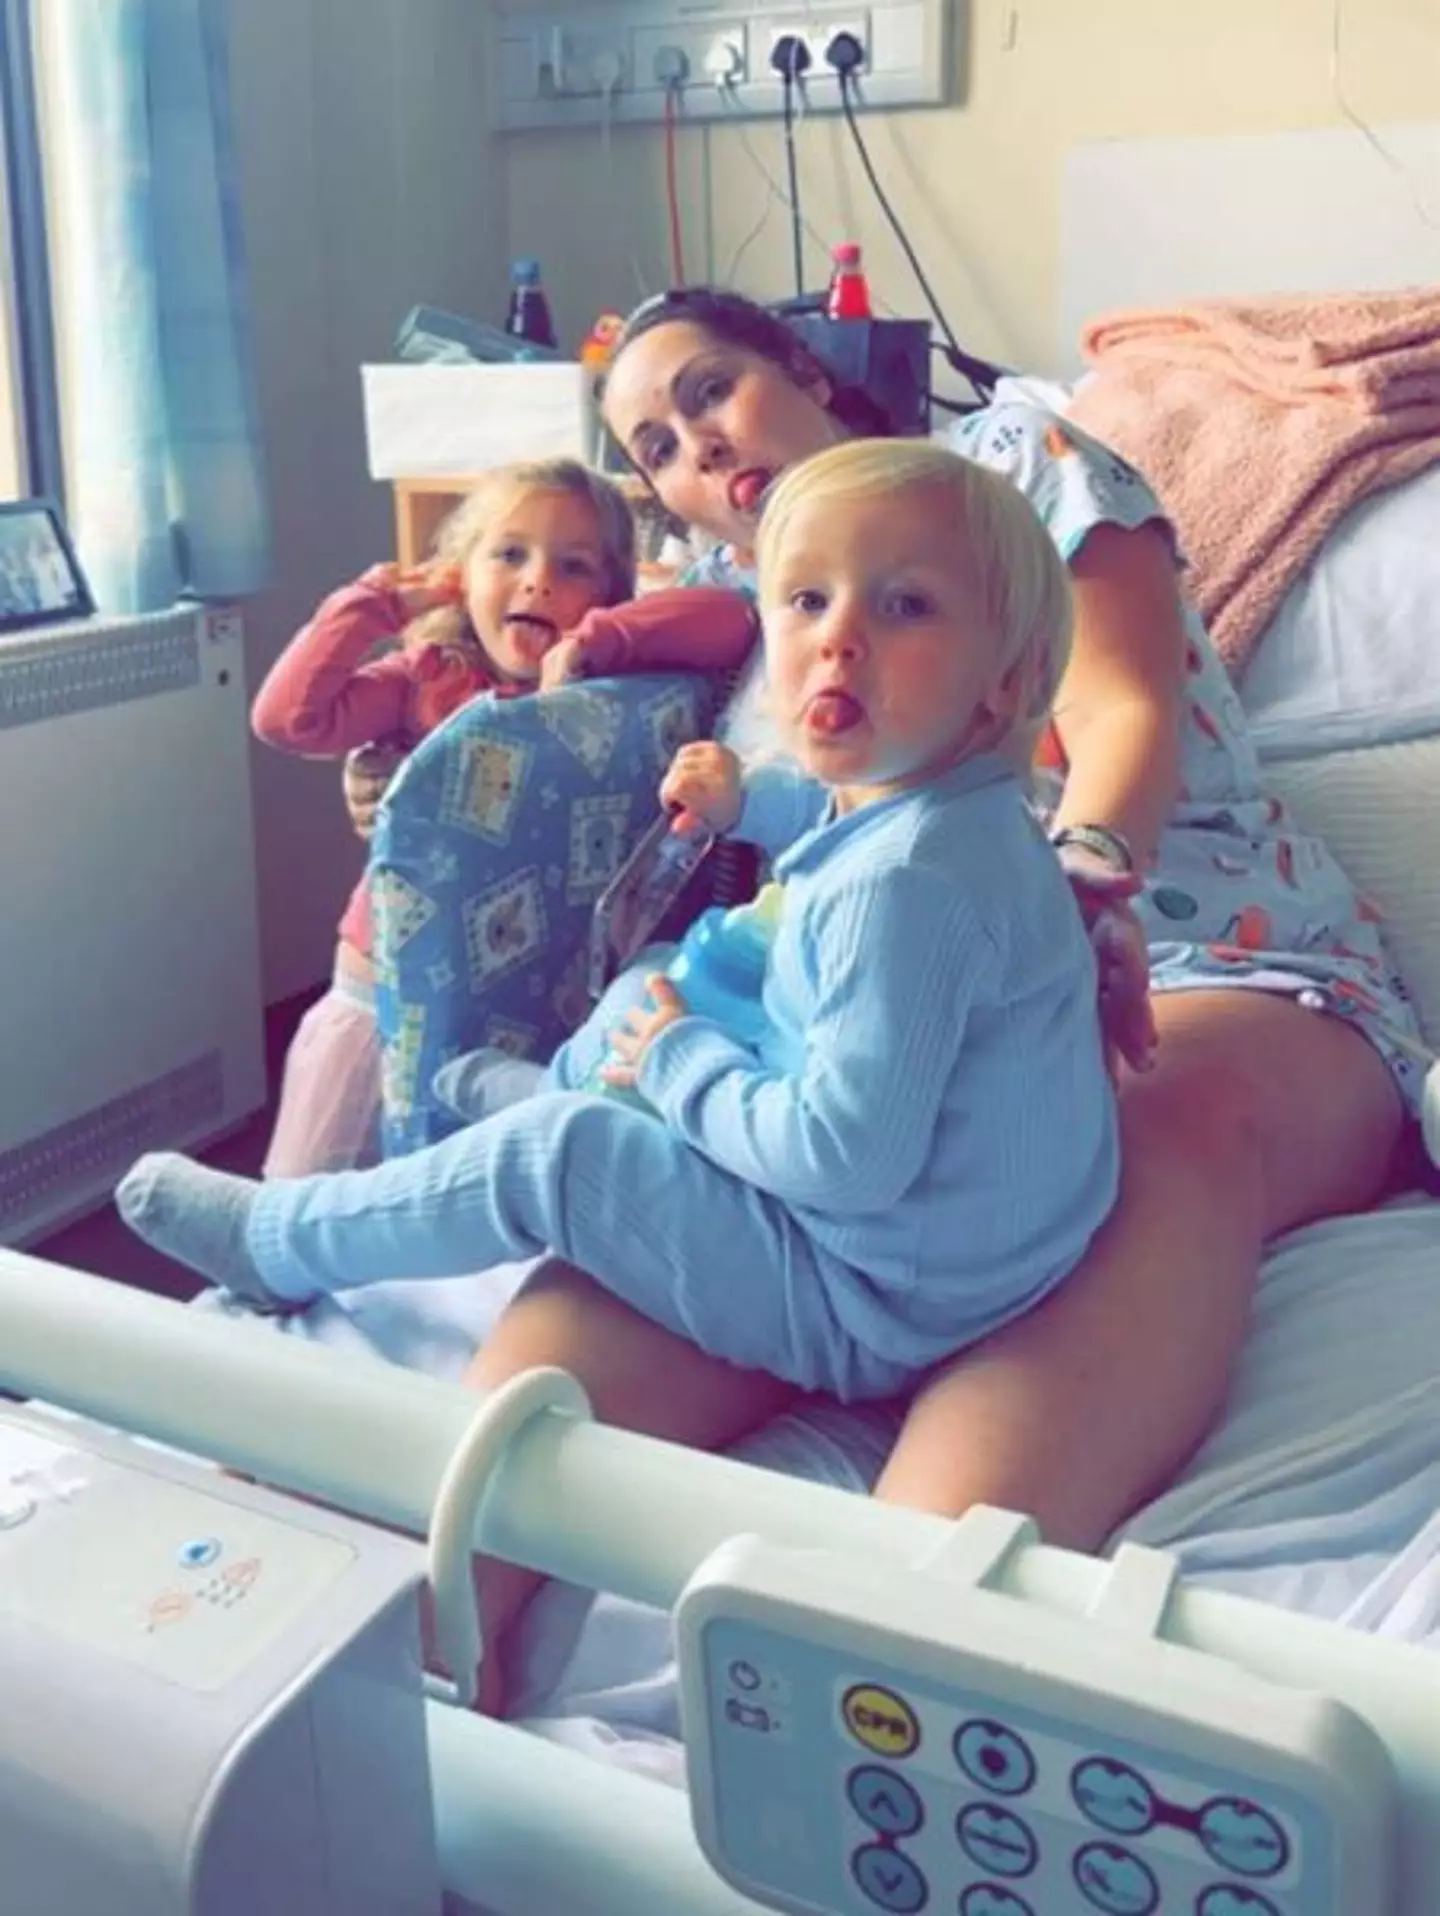 The mum-of-two says she feels ‘completely helpless’.